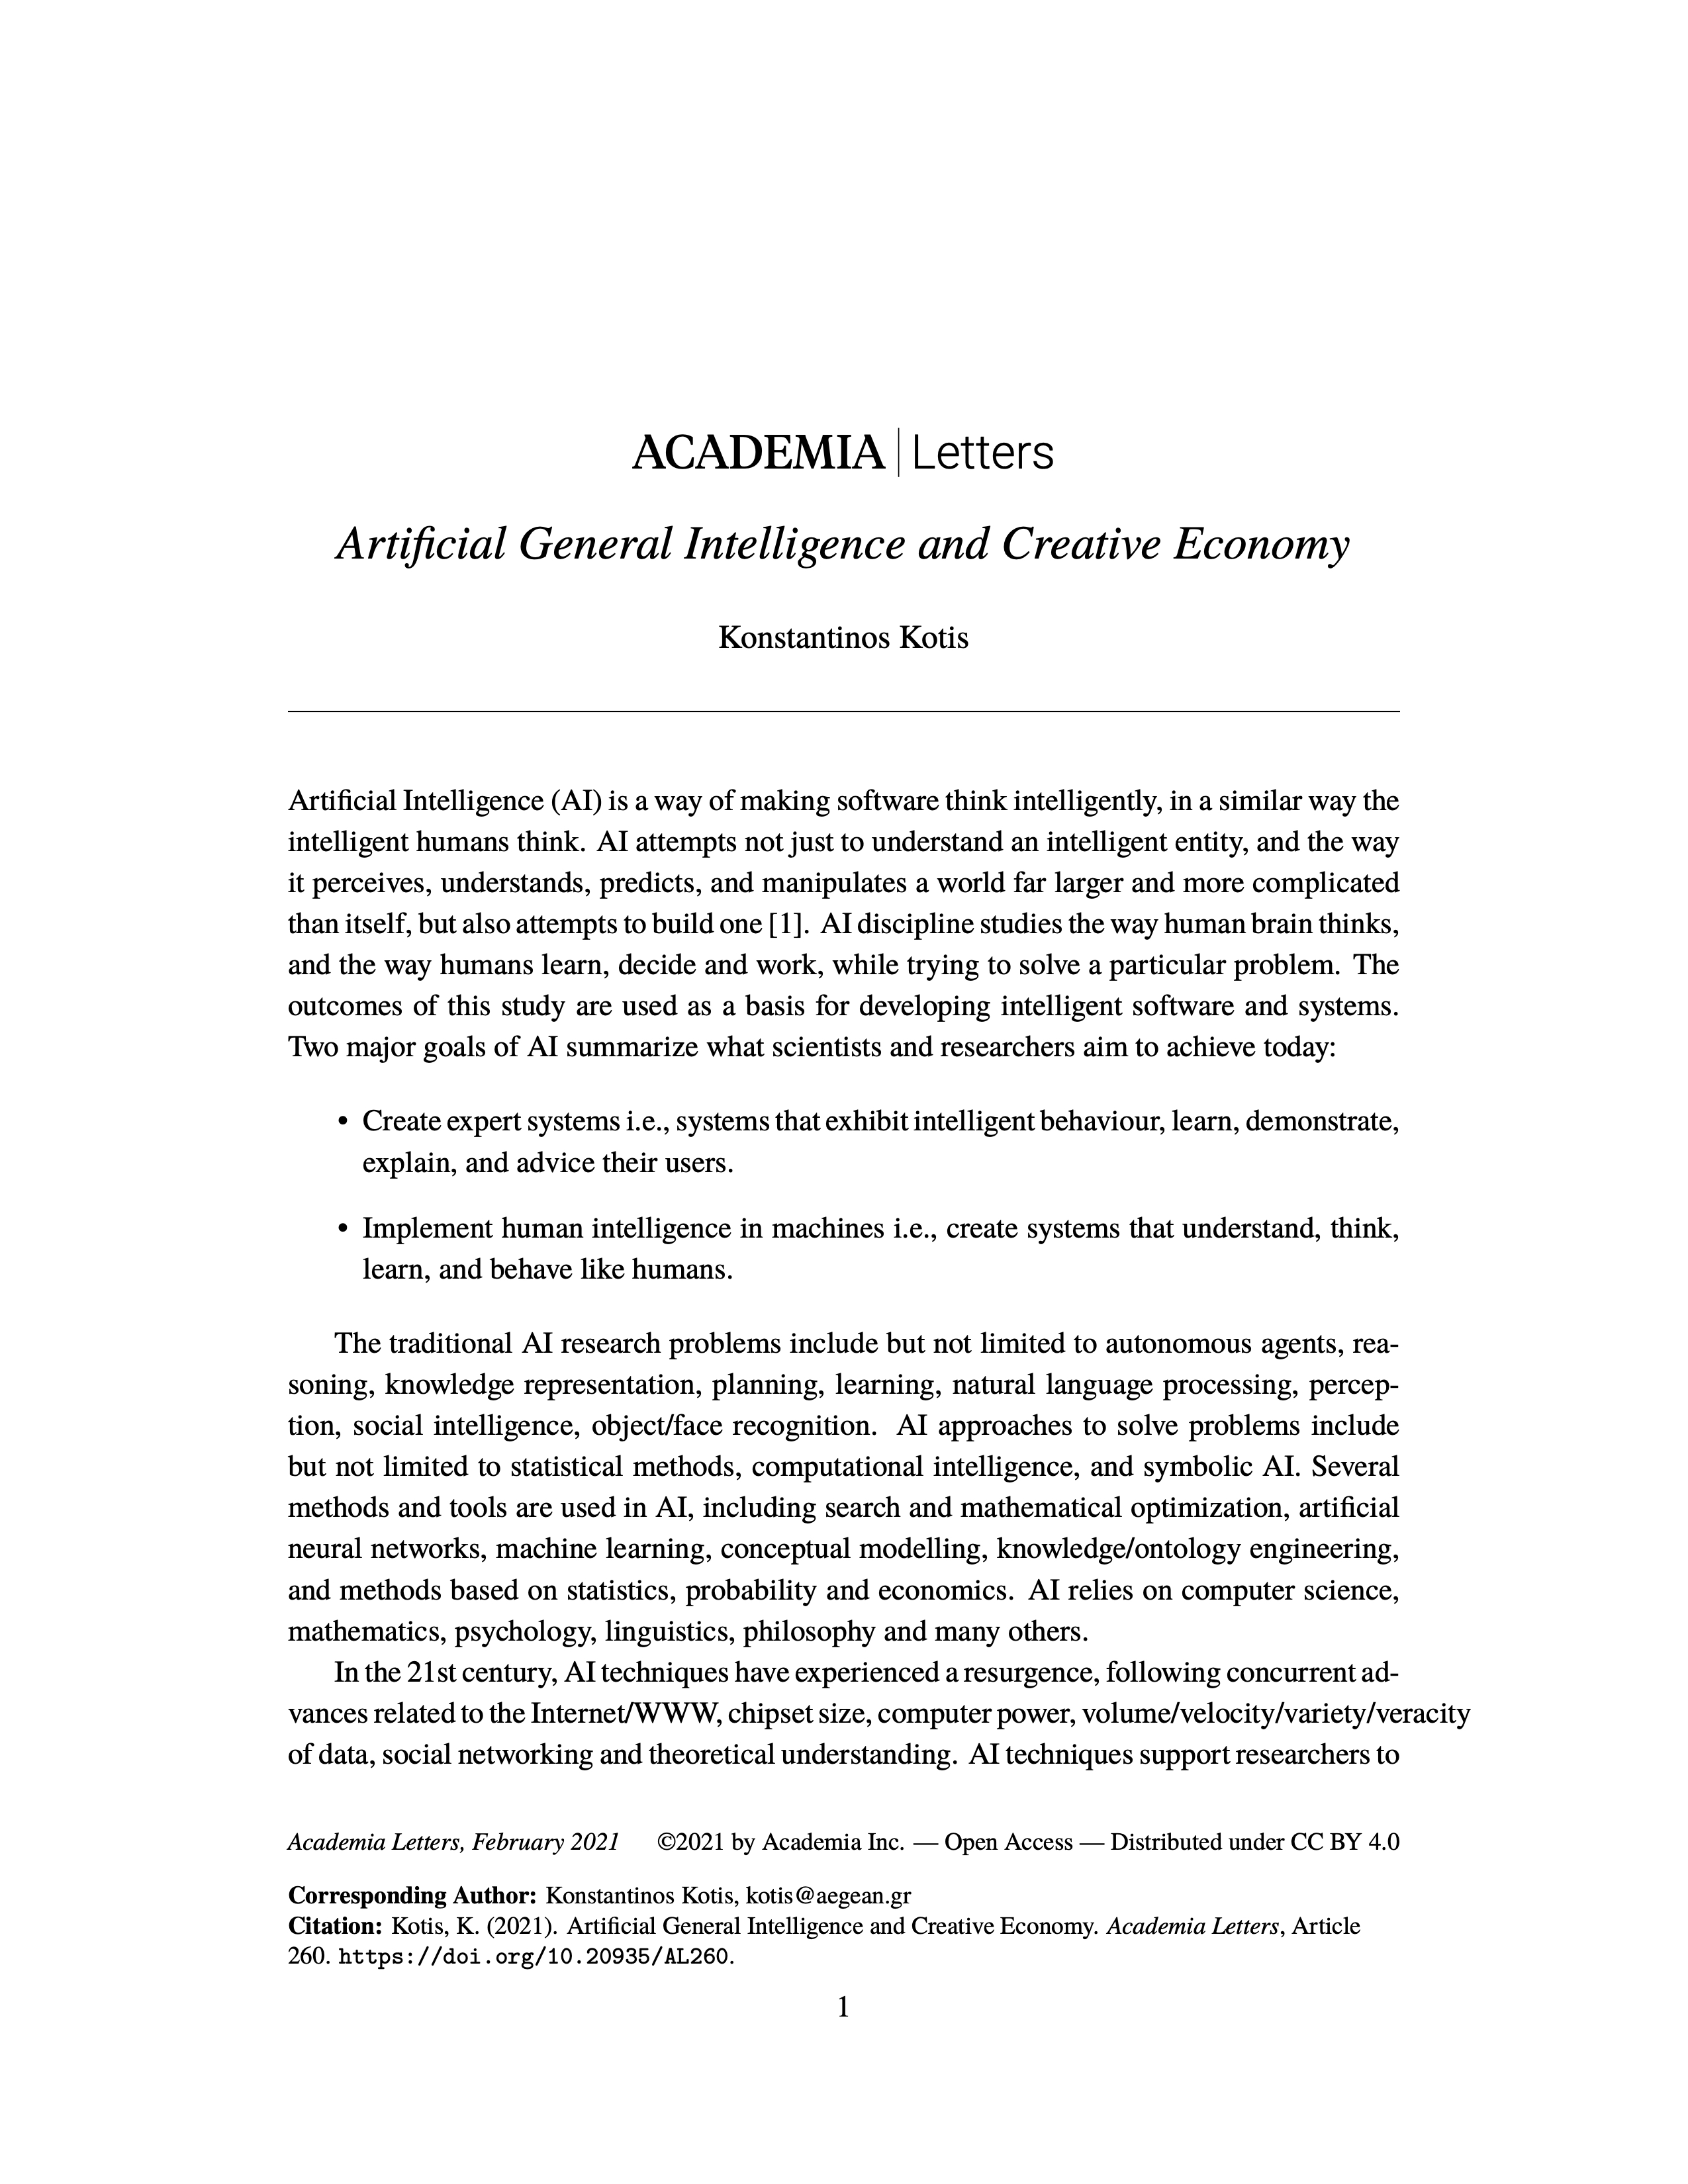 Artificial General Intelligence and Creative Economy